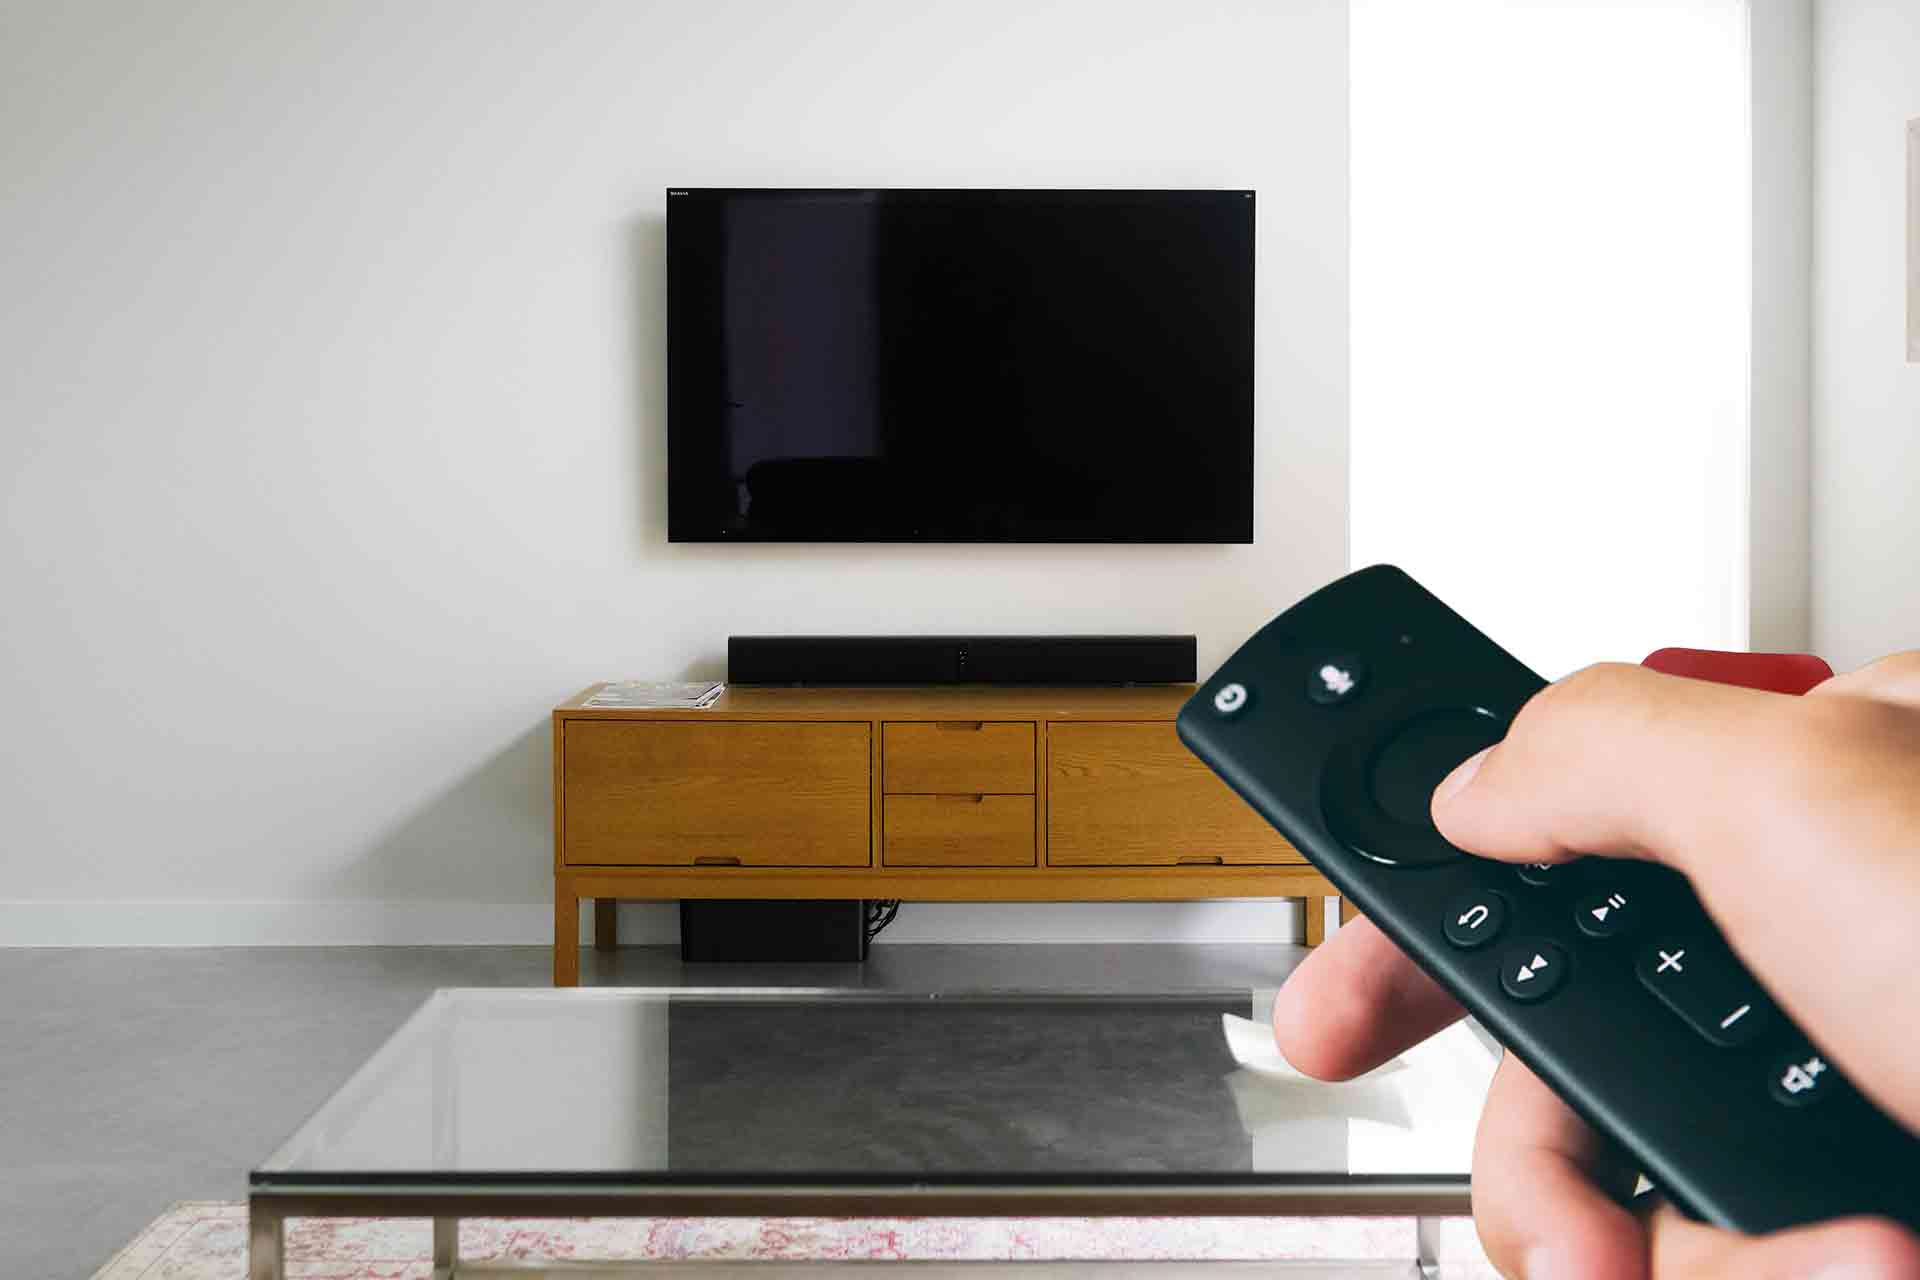 How To View Security Cameras On Smart TV